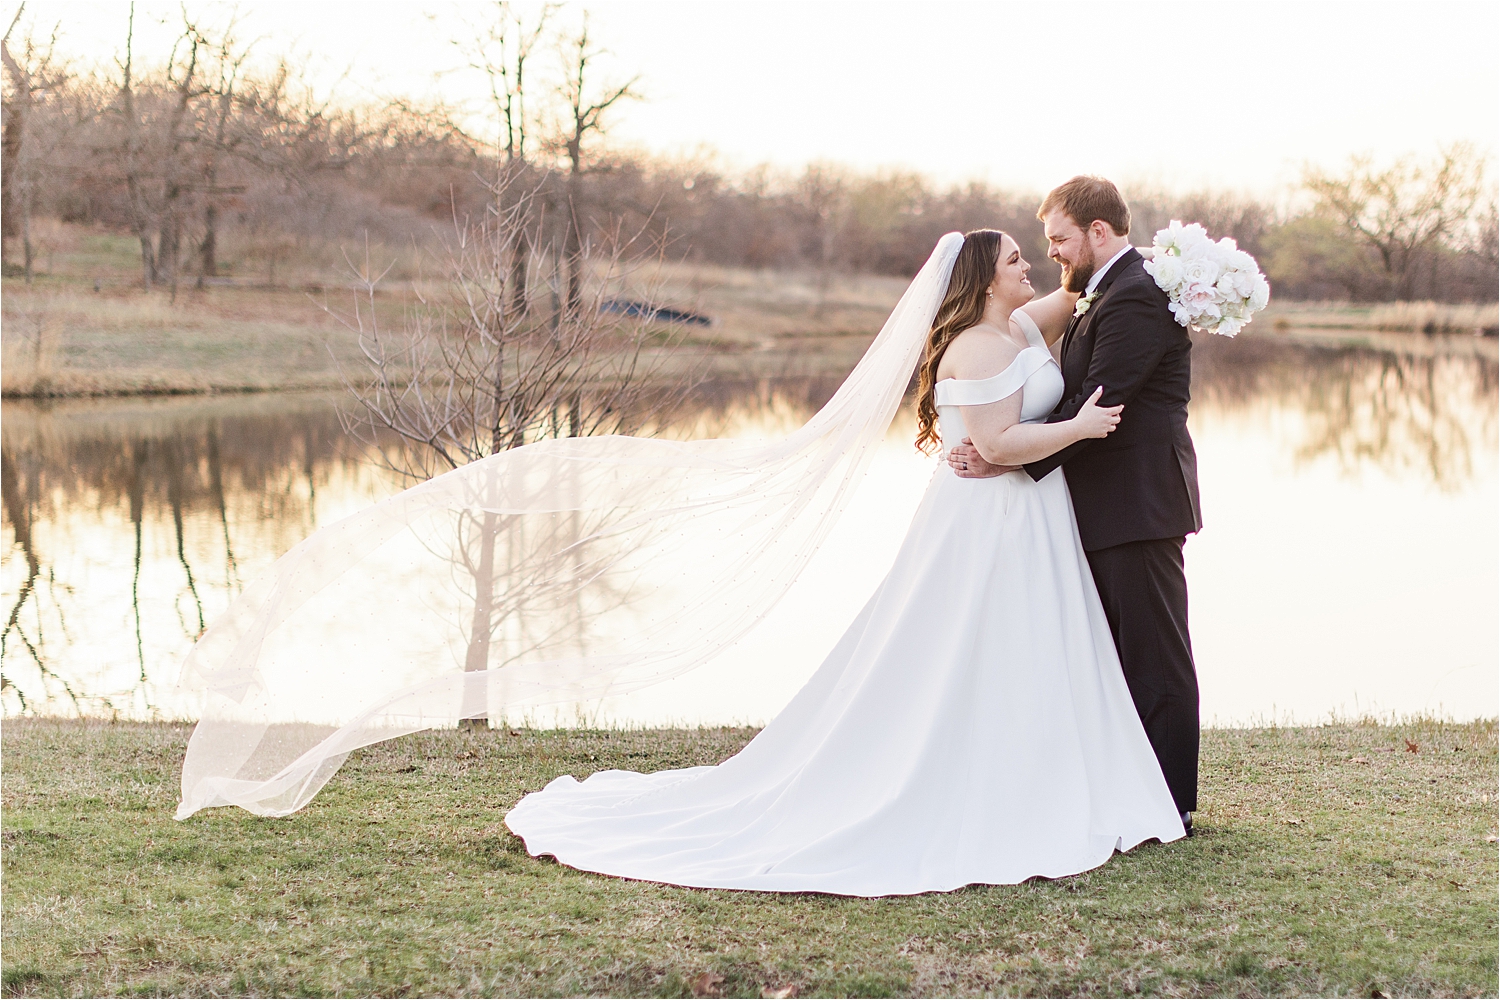 Bride and groom at Dream Point Ranch wedding by the pond.